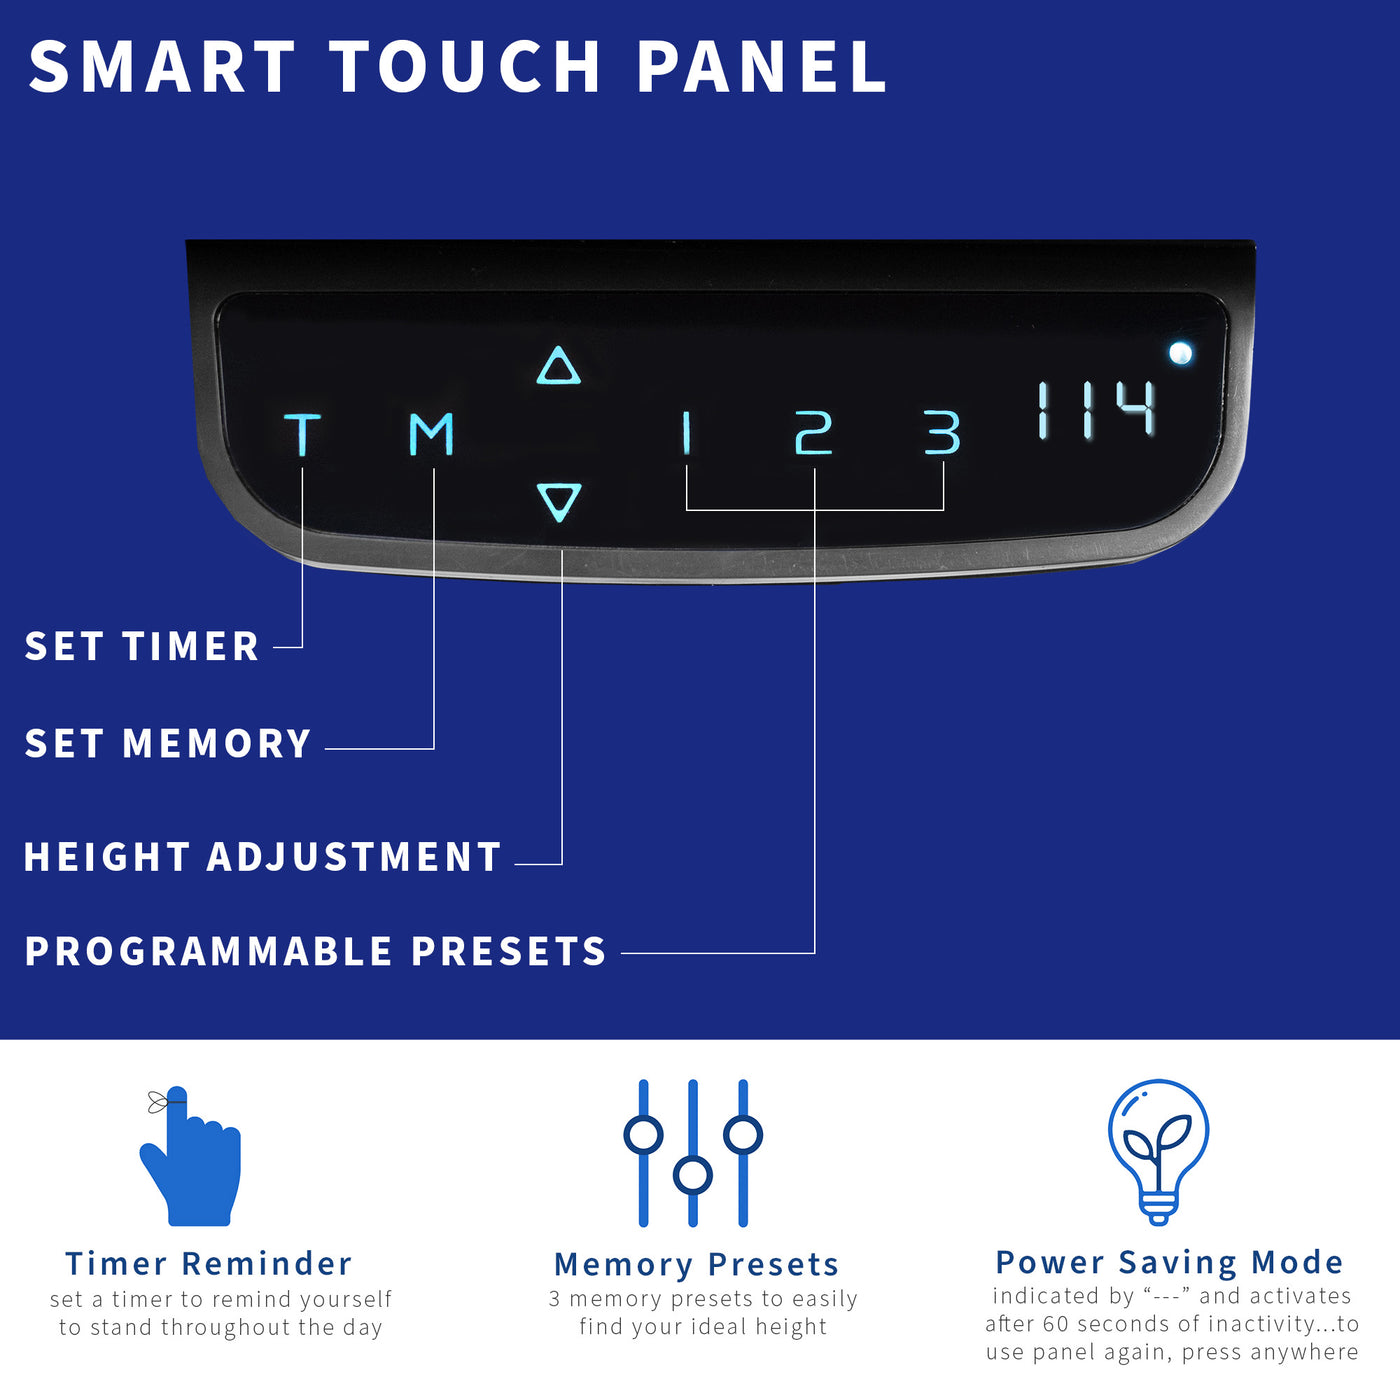 Advanced smart touch control panel with a timer, height adjustment arrows, and programmable presets to lock in ergonomic heights.